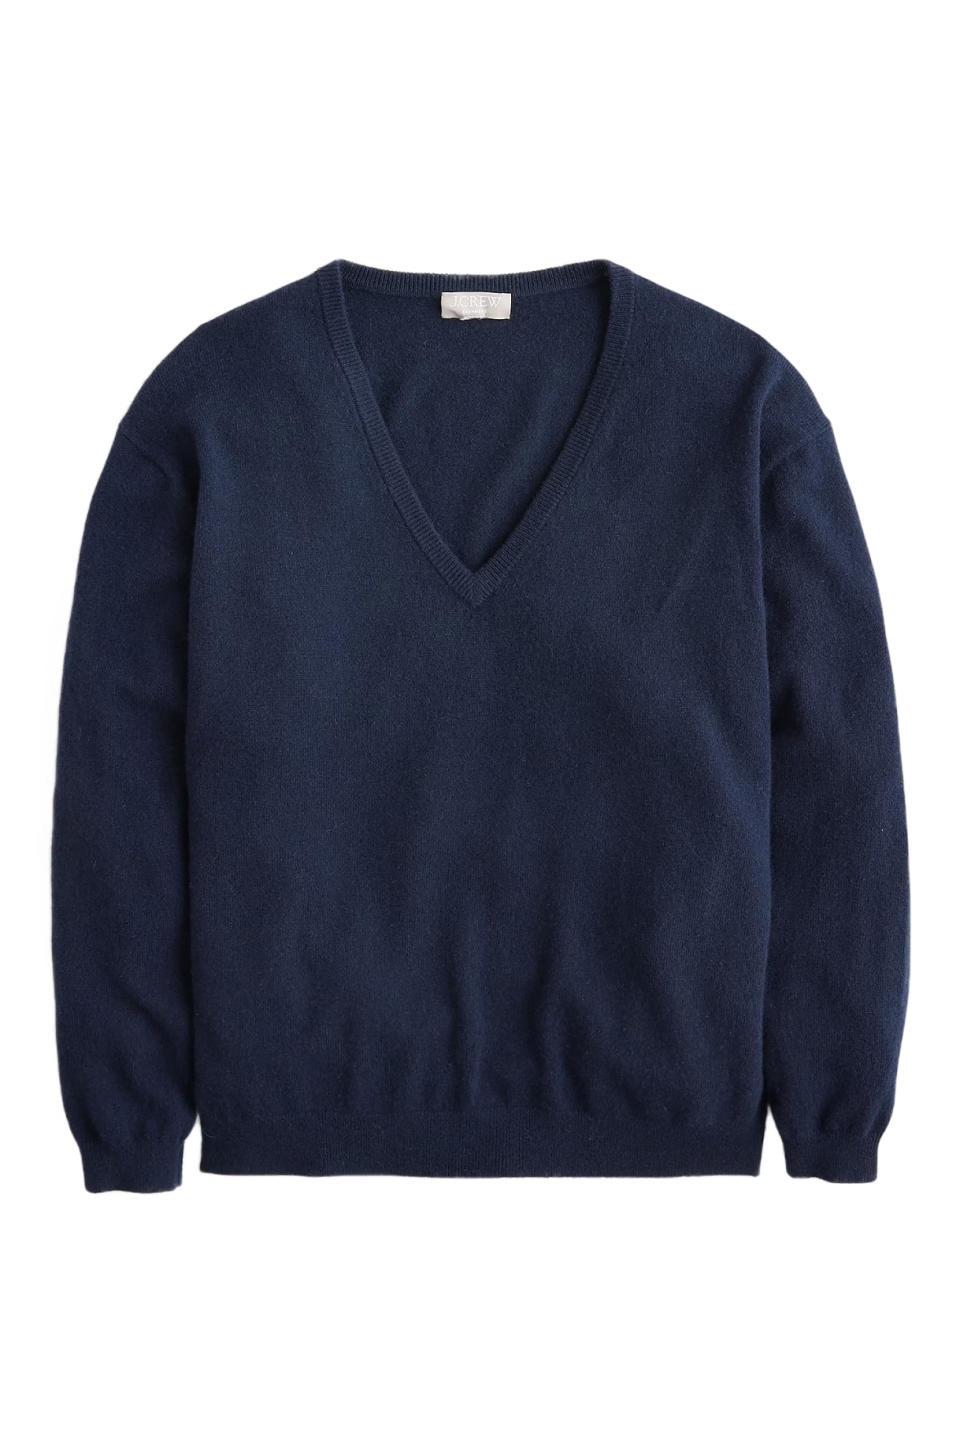 J. Crew Cashmere Relaxed V-Neck Sweater